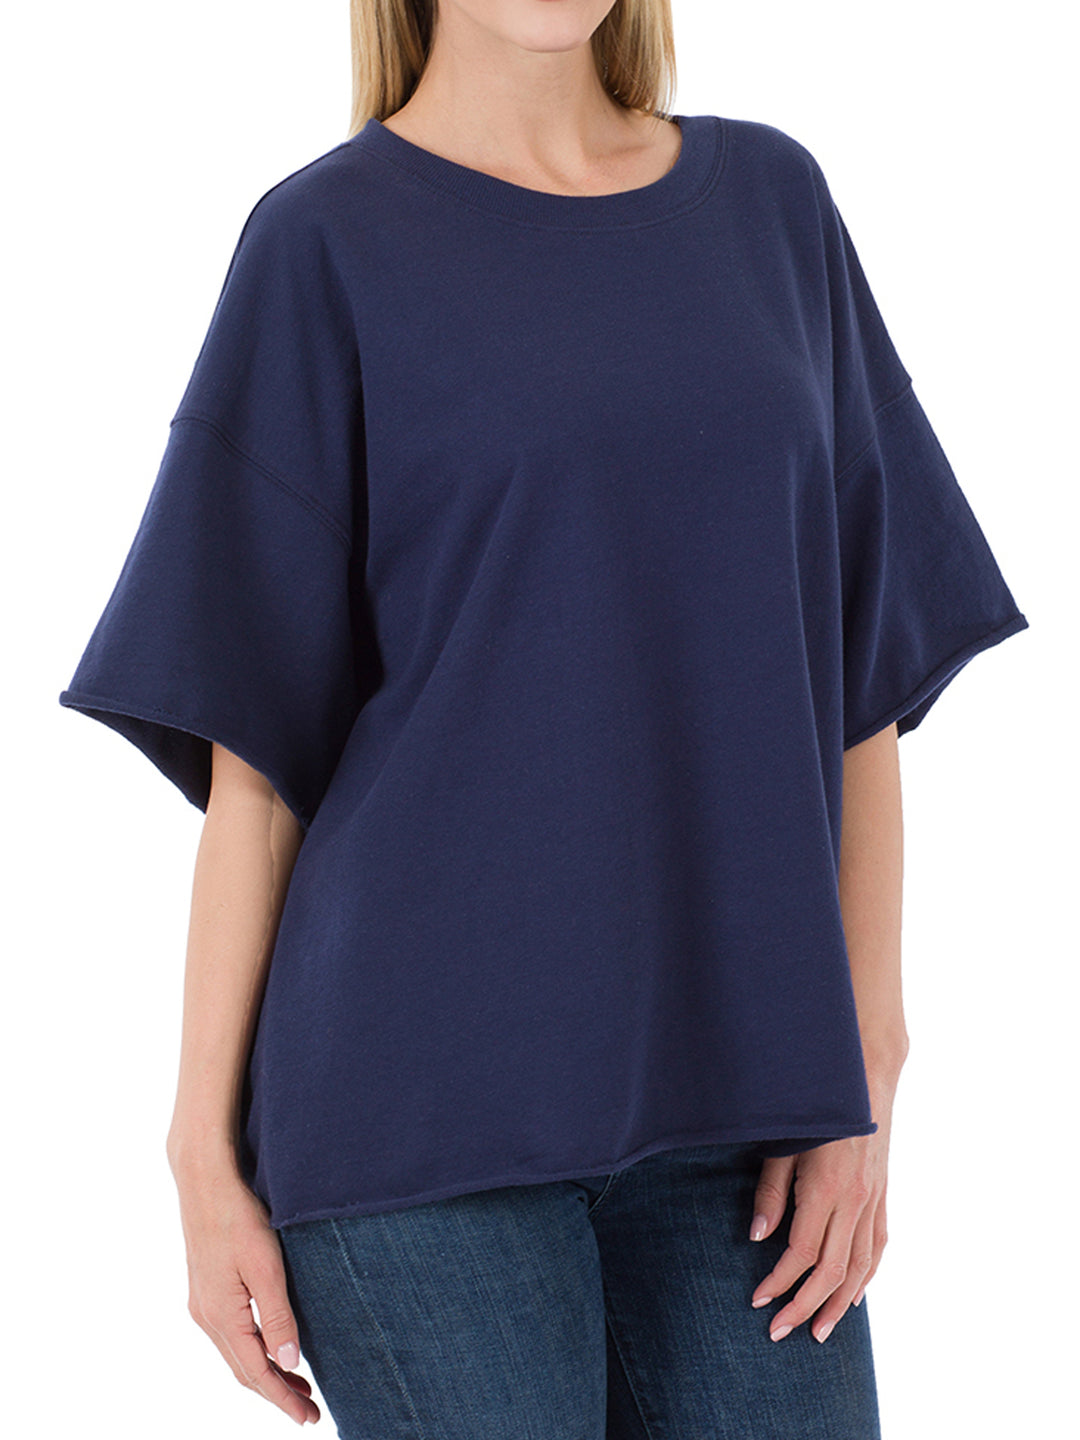 Plus Size terry drop sleeve raw edge top in NAVY BLUE